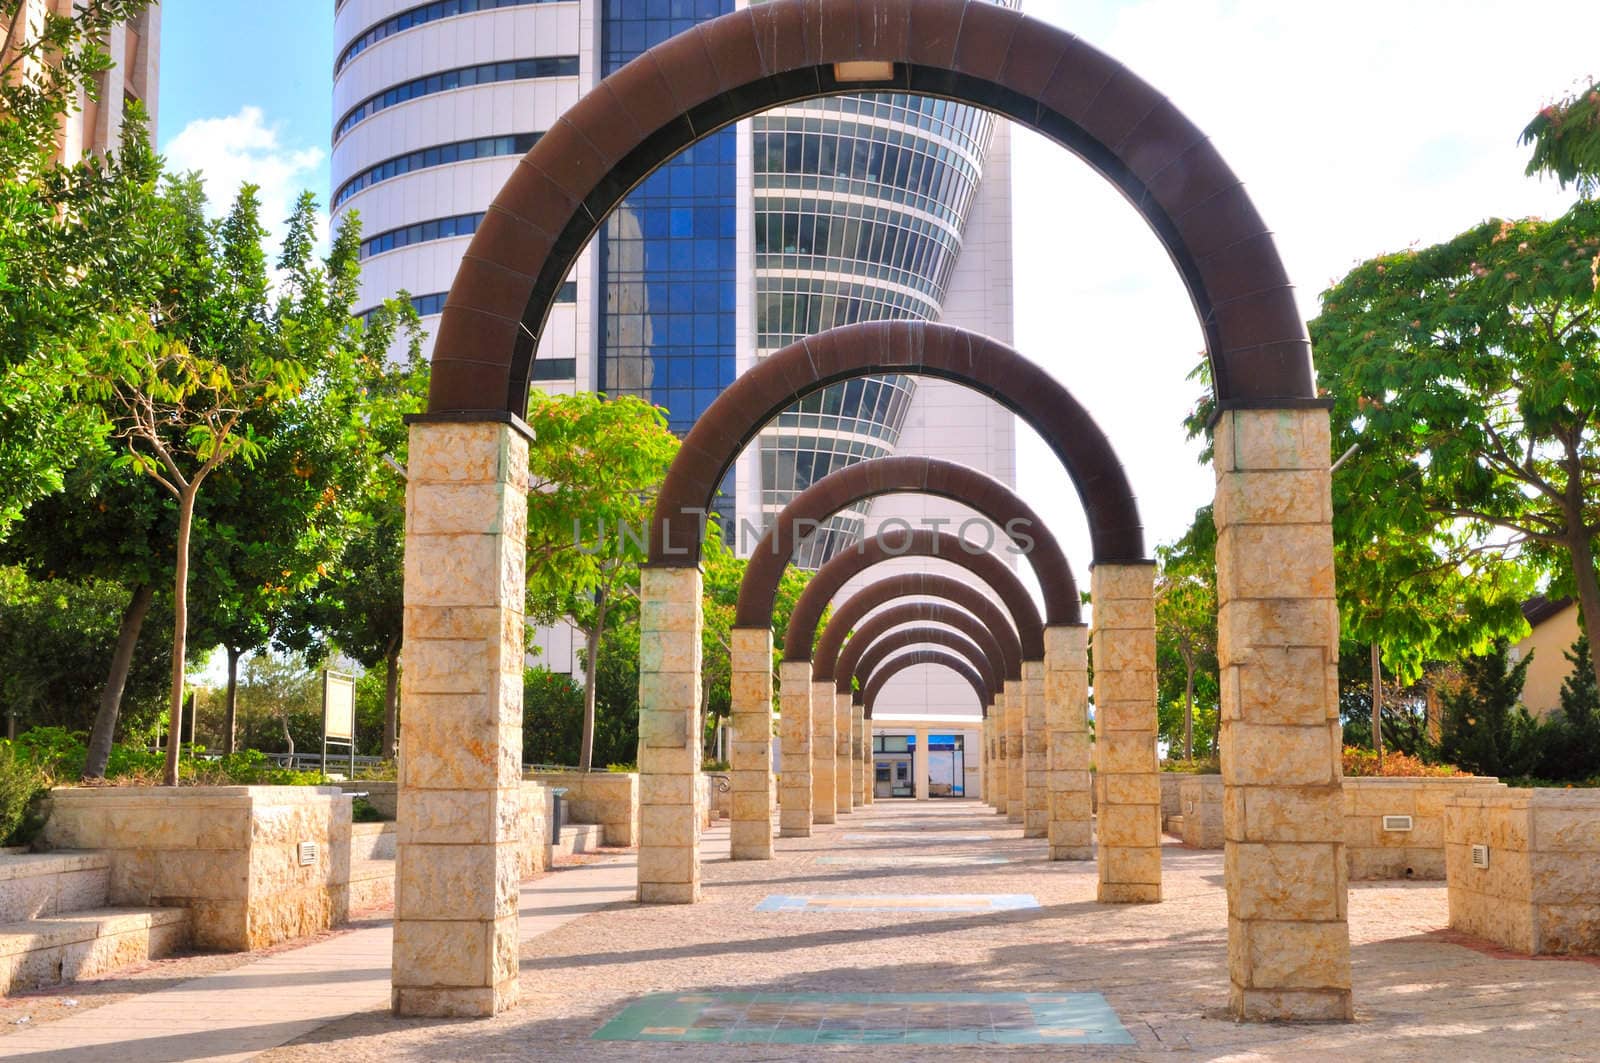 Alley of metal arches on stone pillars leading to an office building